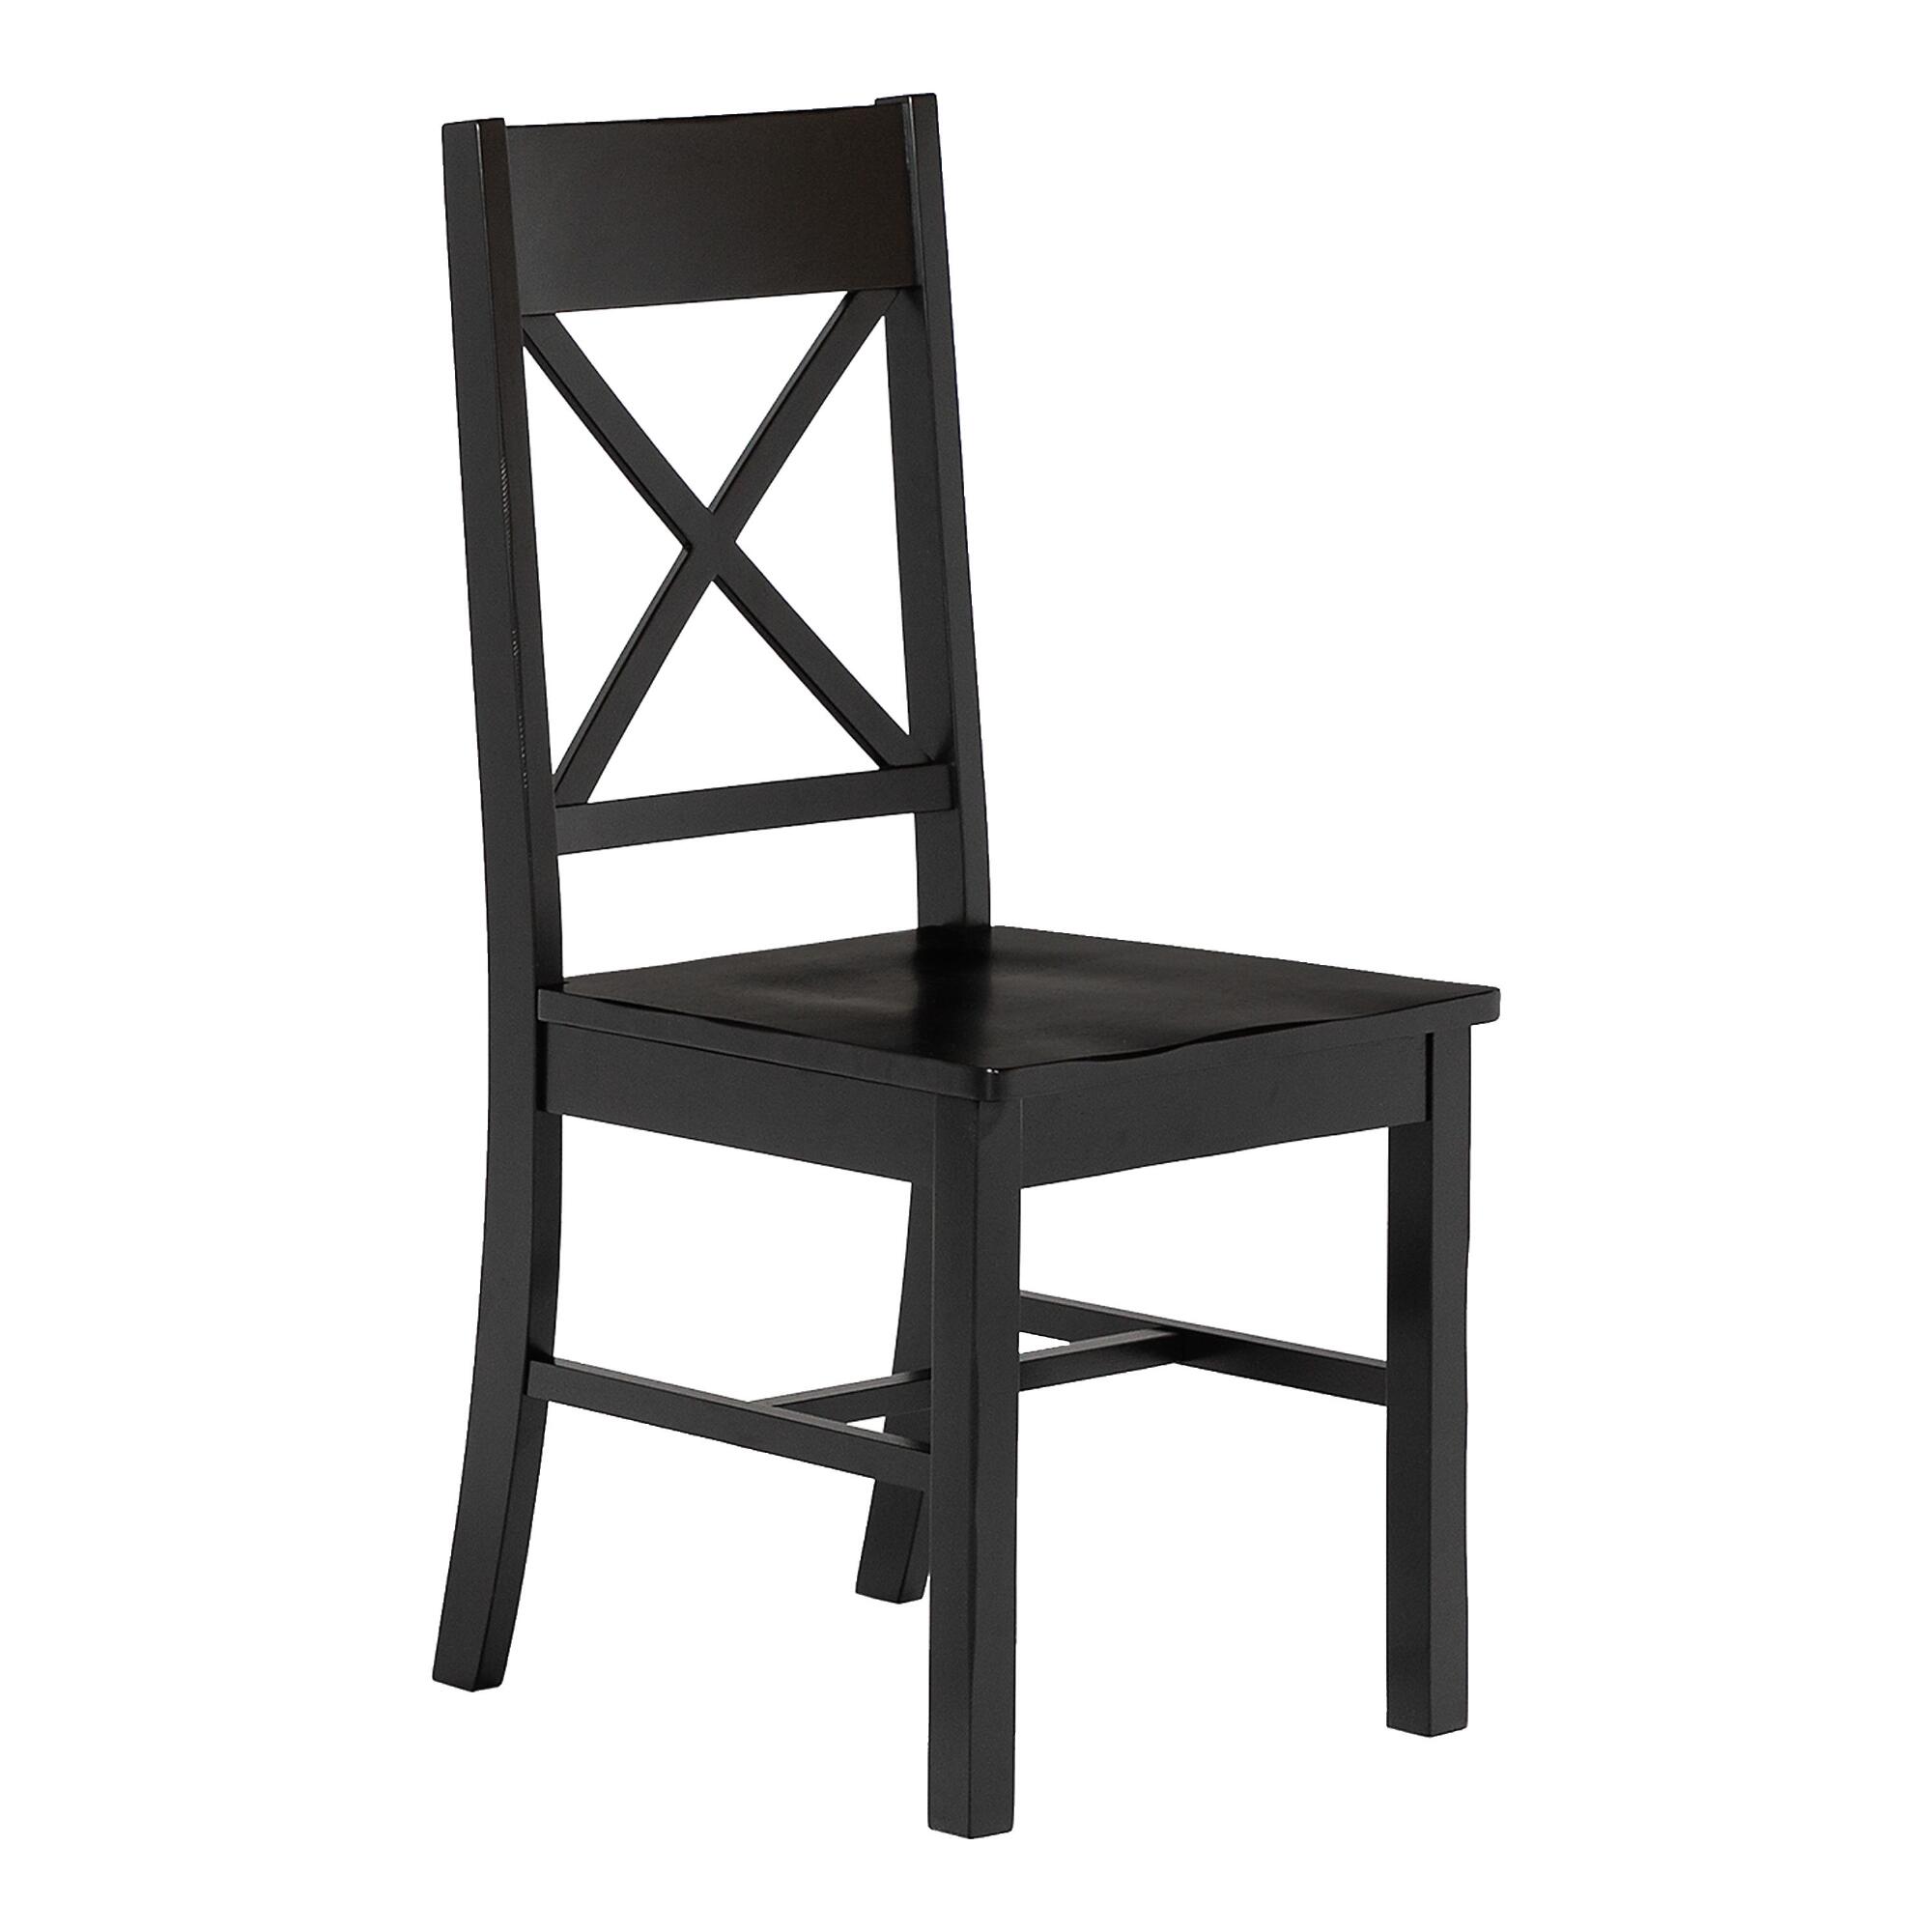 Distressed Black Wood Montgomery Dining Chair Set of 2 by World Market